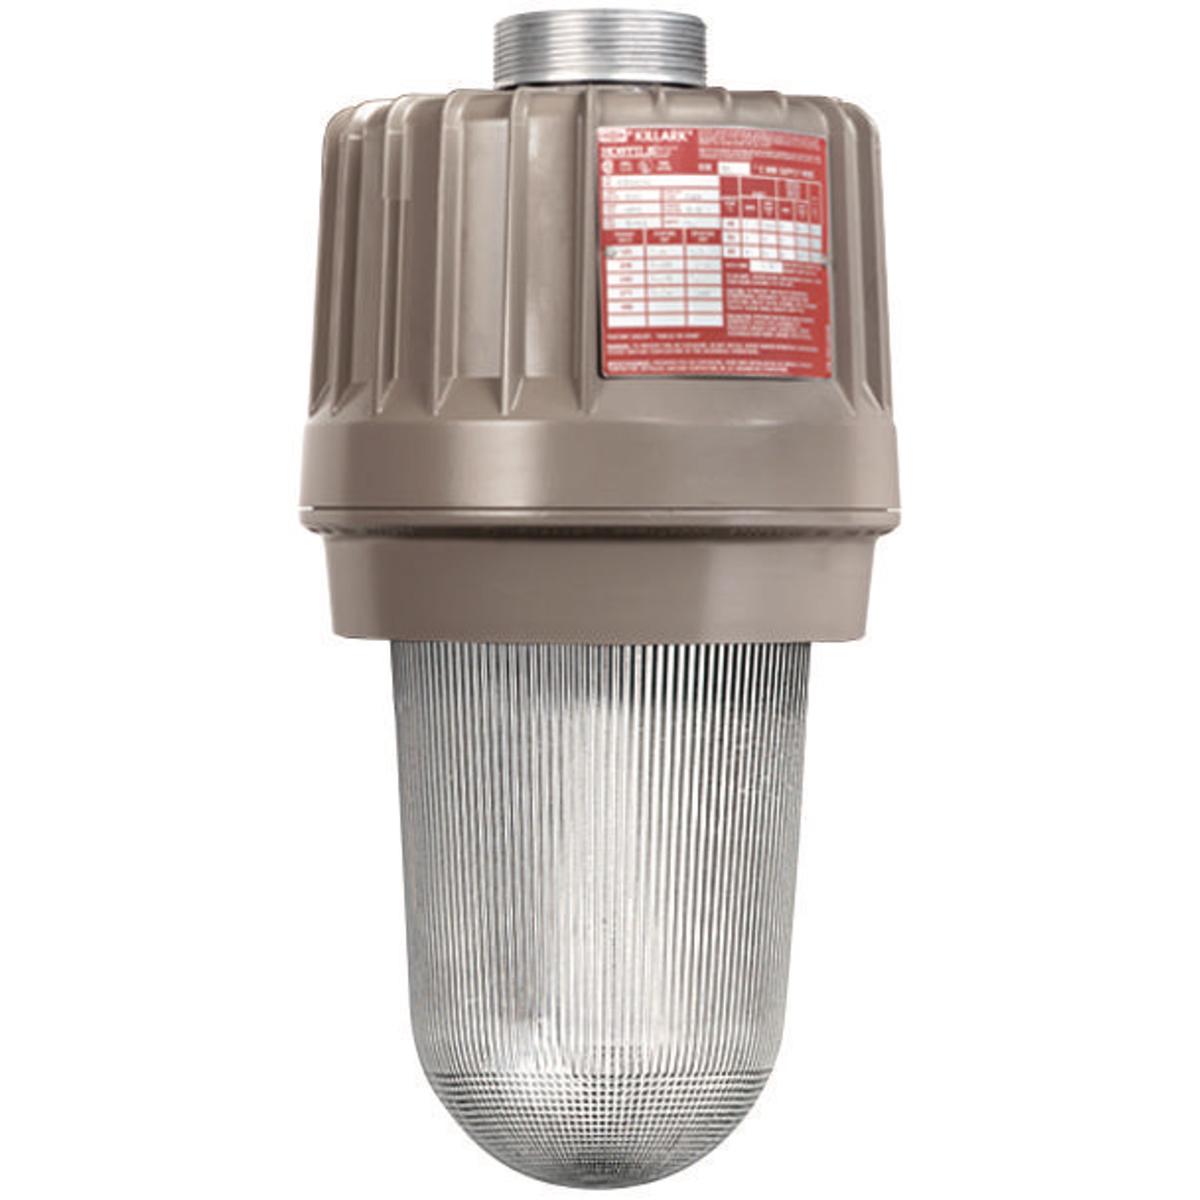 Hubbell EZP258 250W 220/240V Pulse-Start Metal Halide 50Hz  ; Three light sources – High Pressure Sodium (50-400W), Metal Halide (70-400W) and Pulse Start Metal Halide (175-400W) ; Mounting choice –Pendant, ceiling, 25˚ stanchion or 90˚ wall mount, all with “wireless” d